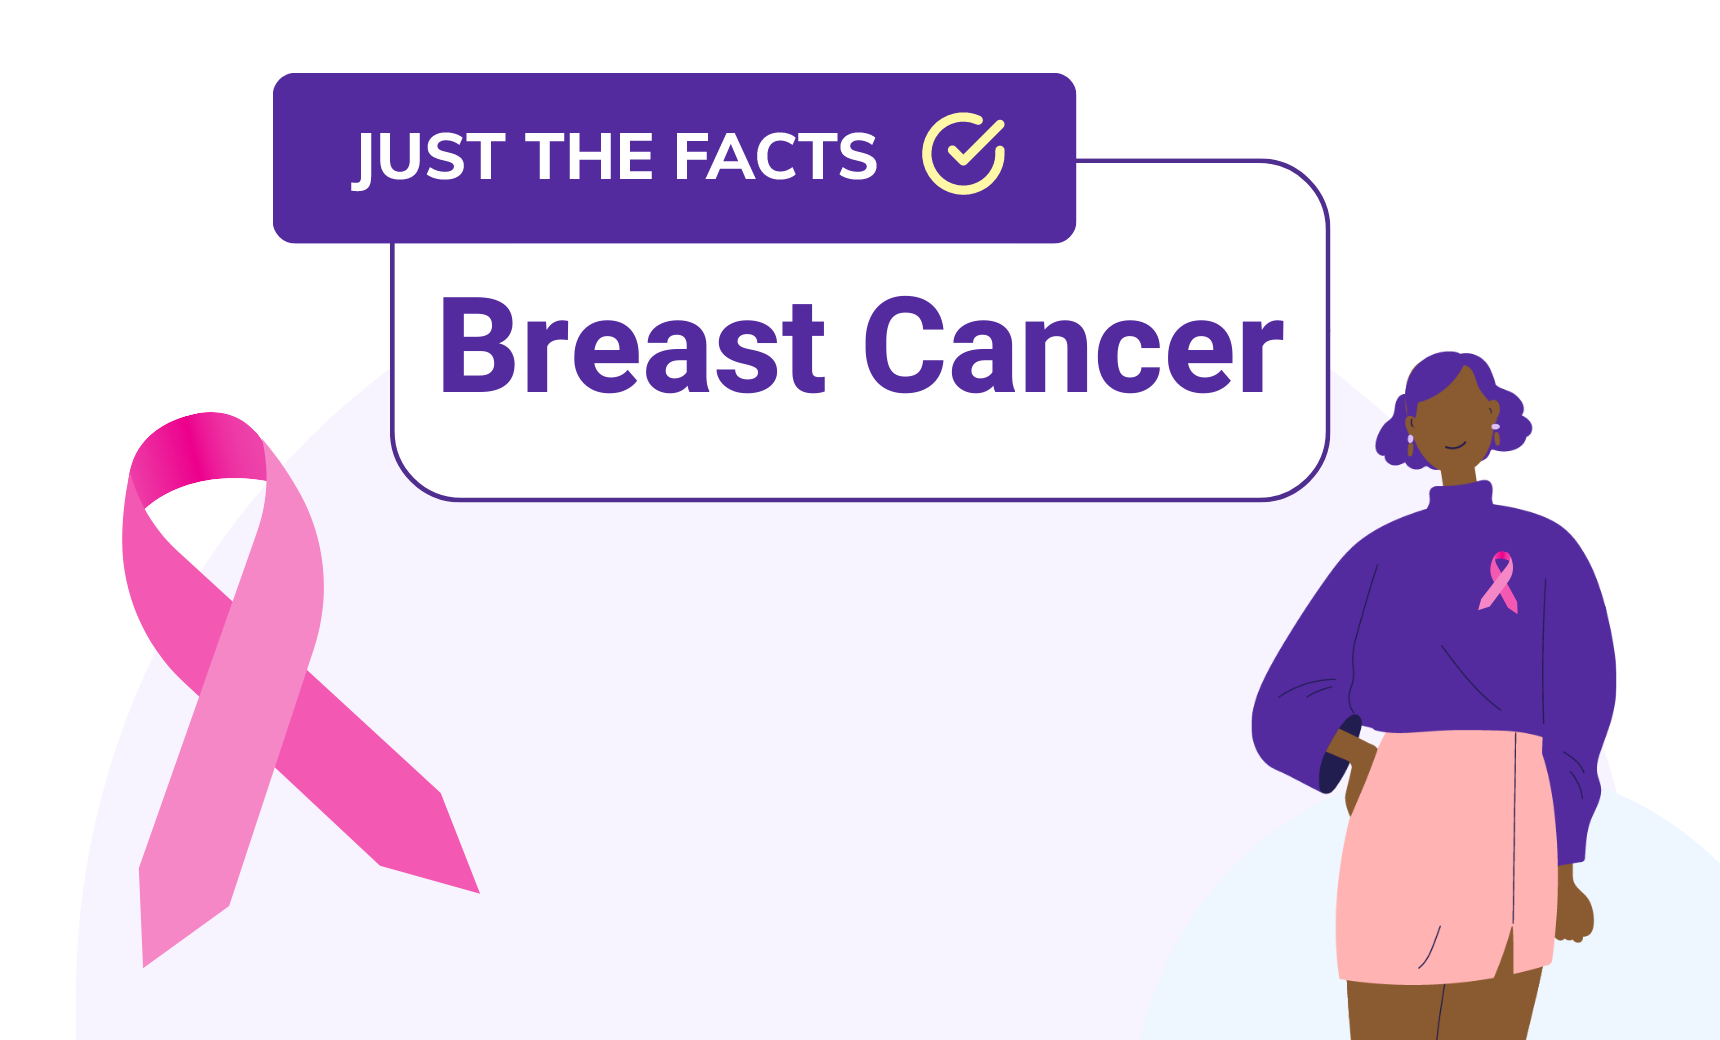 Just the Facts: Breast Cancer